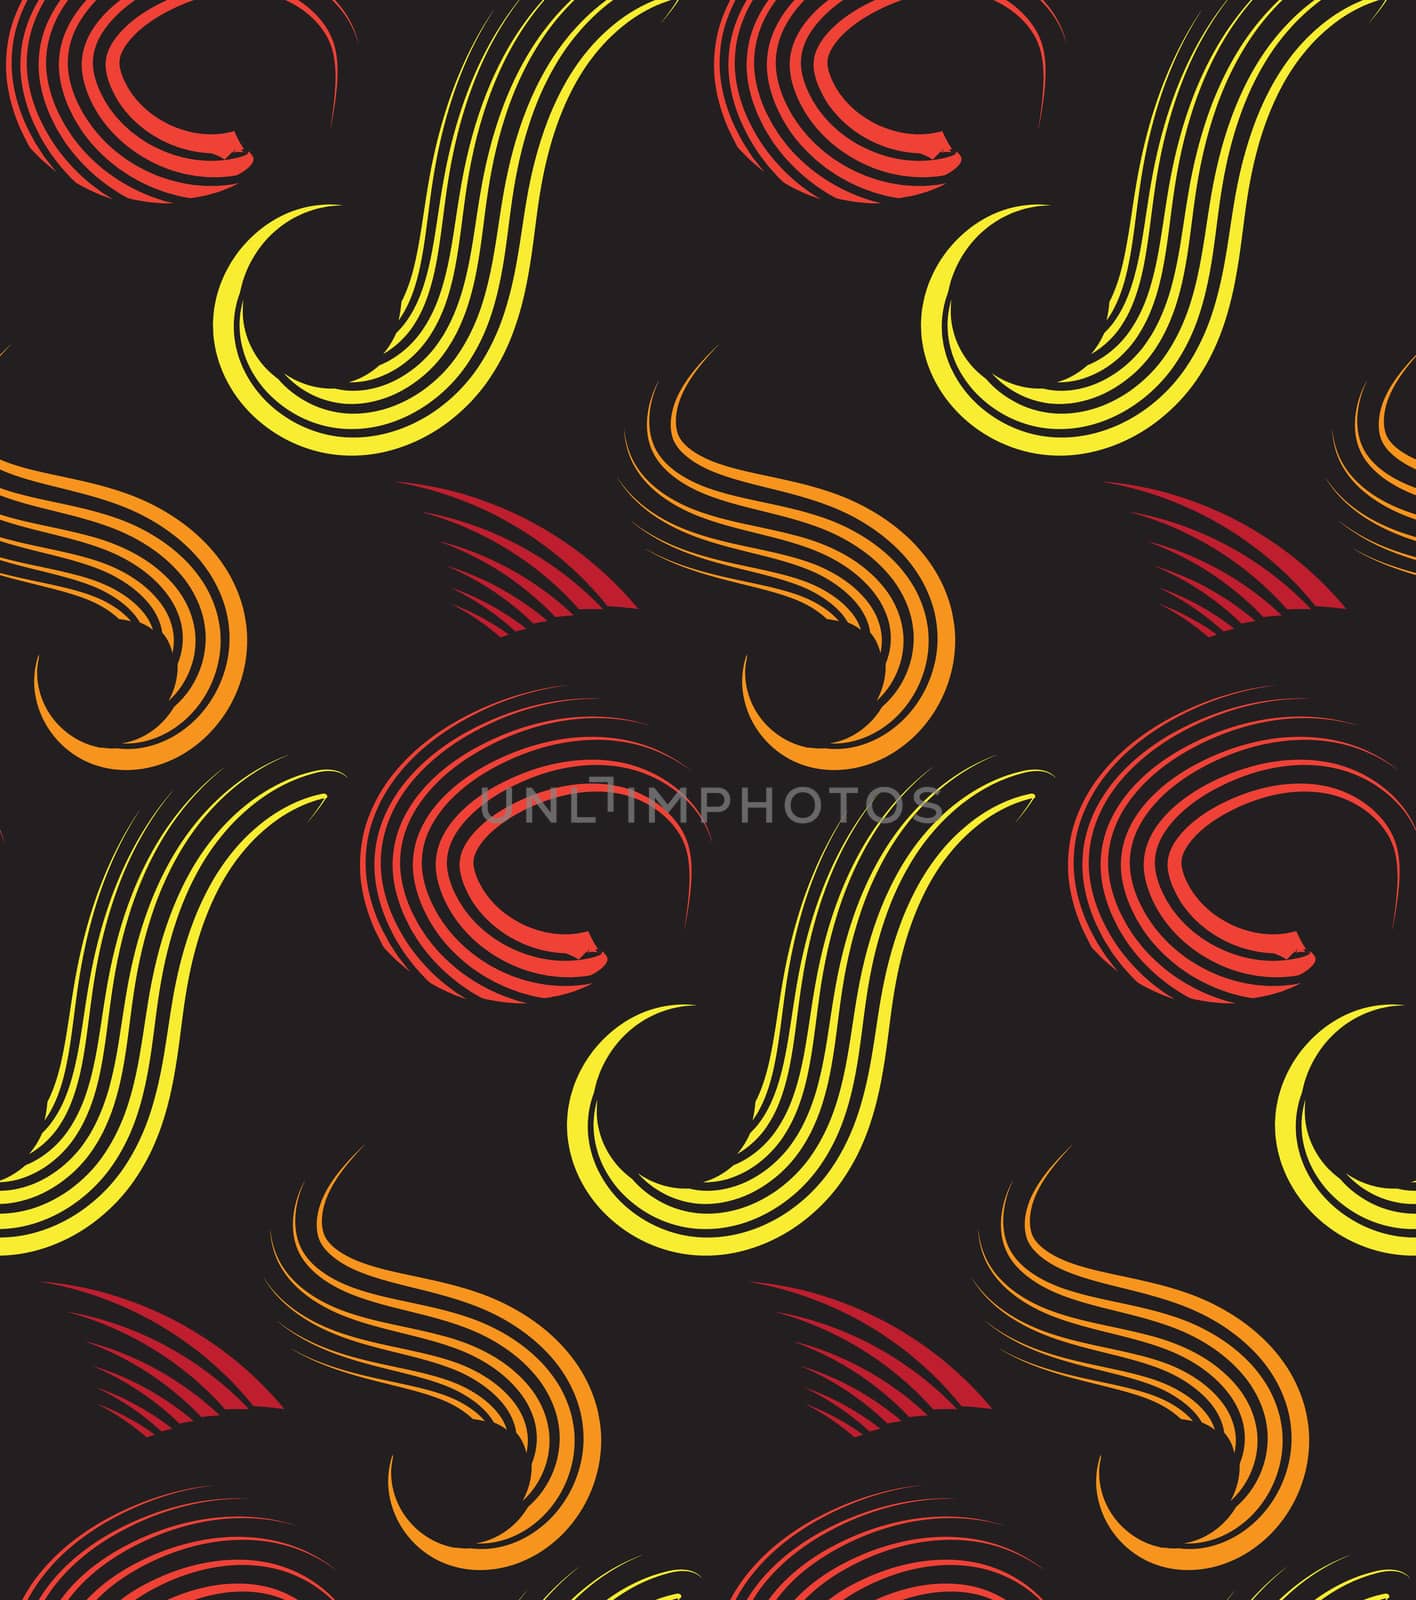 Grunge colorful abstract geometric seamless pattern. Vector